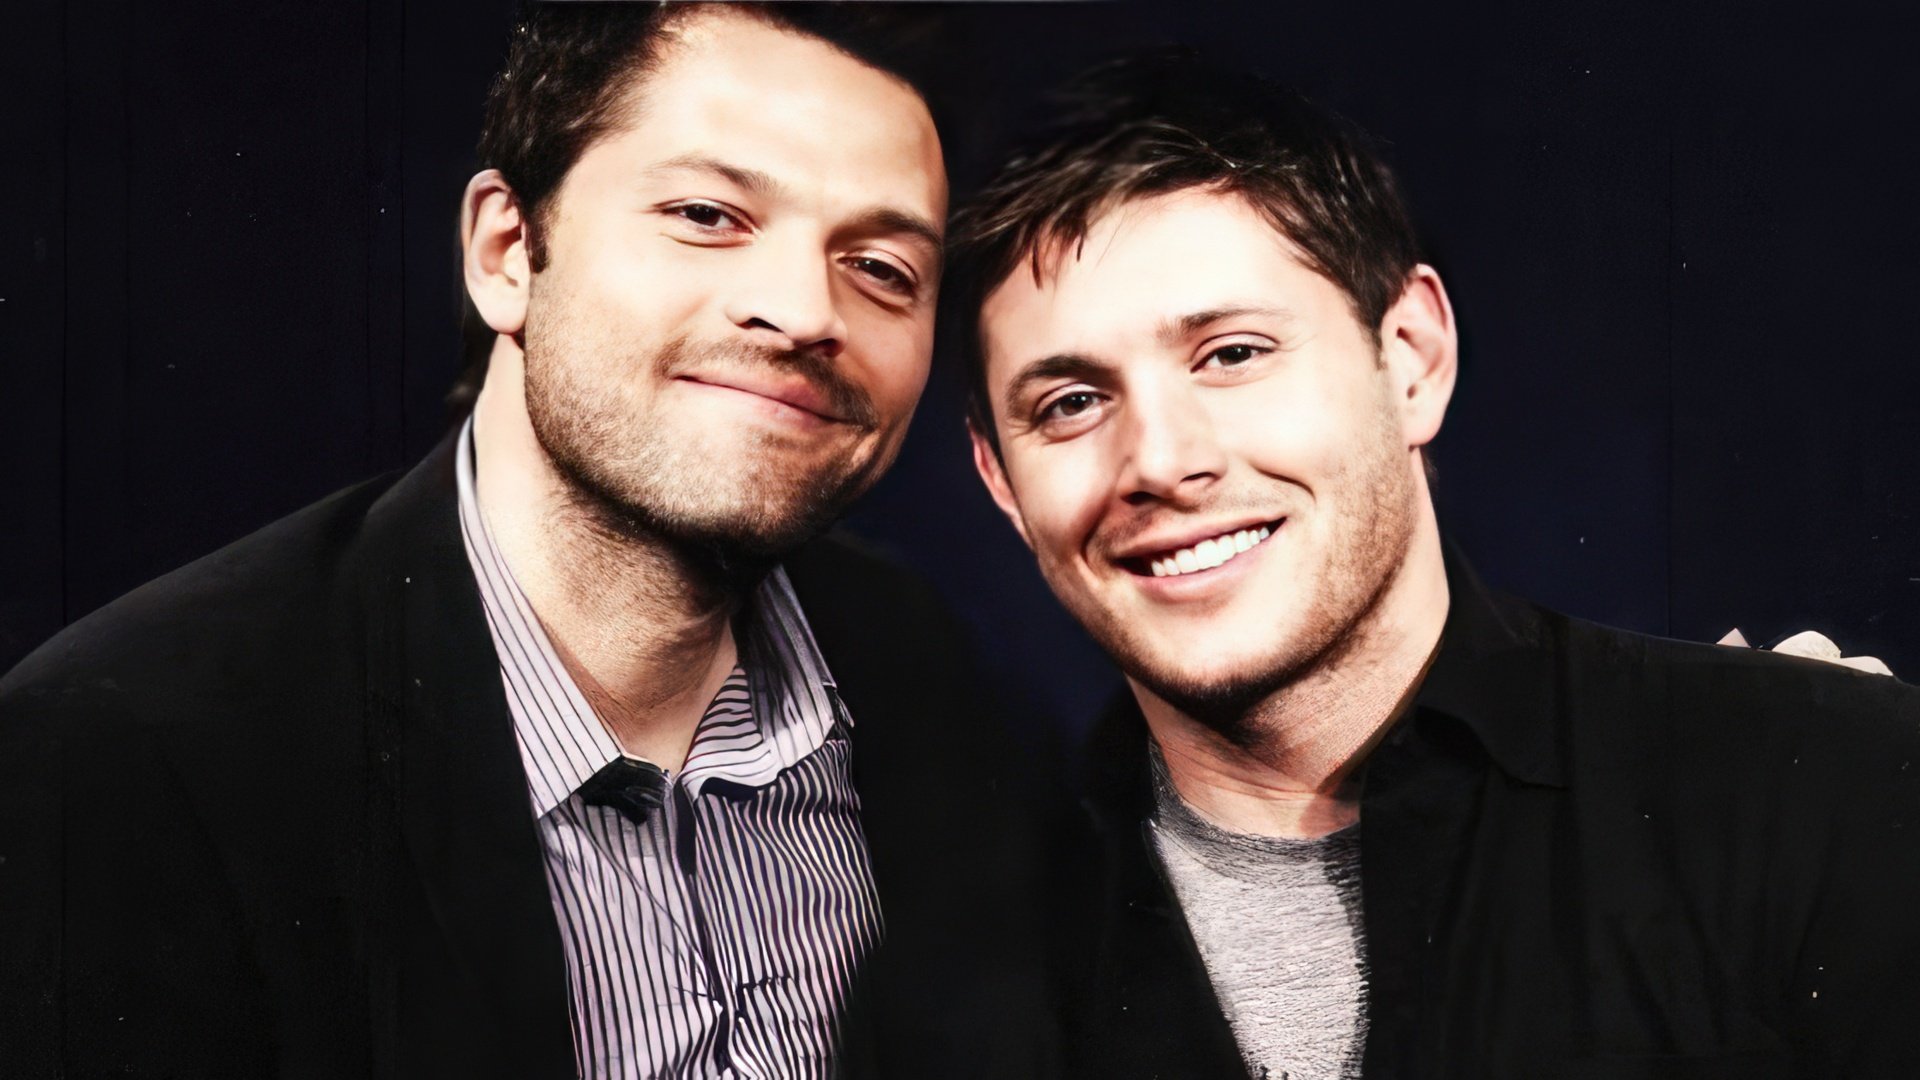 Misha Collins and Jensen Ackles are close friends in real life